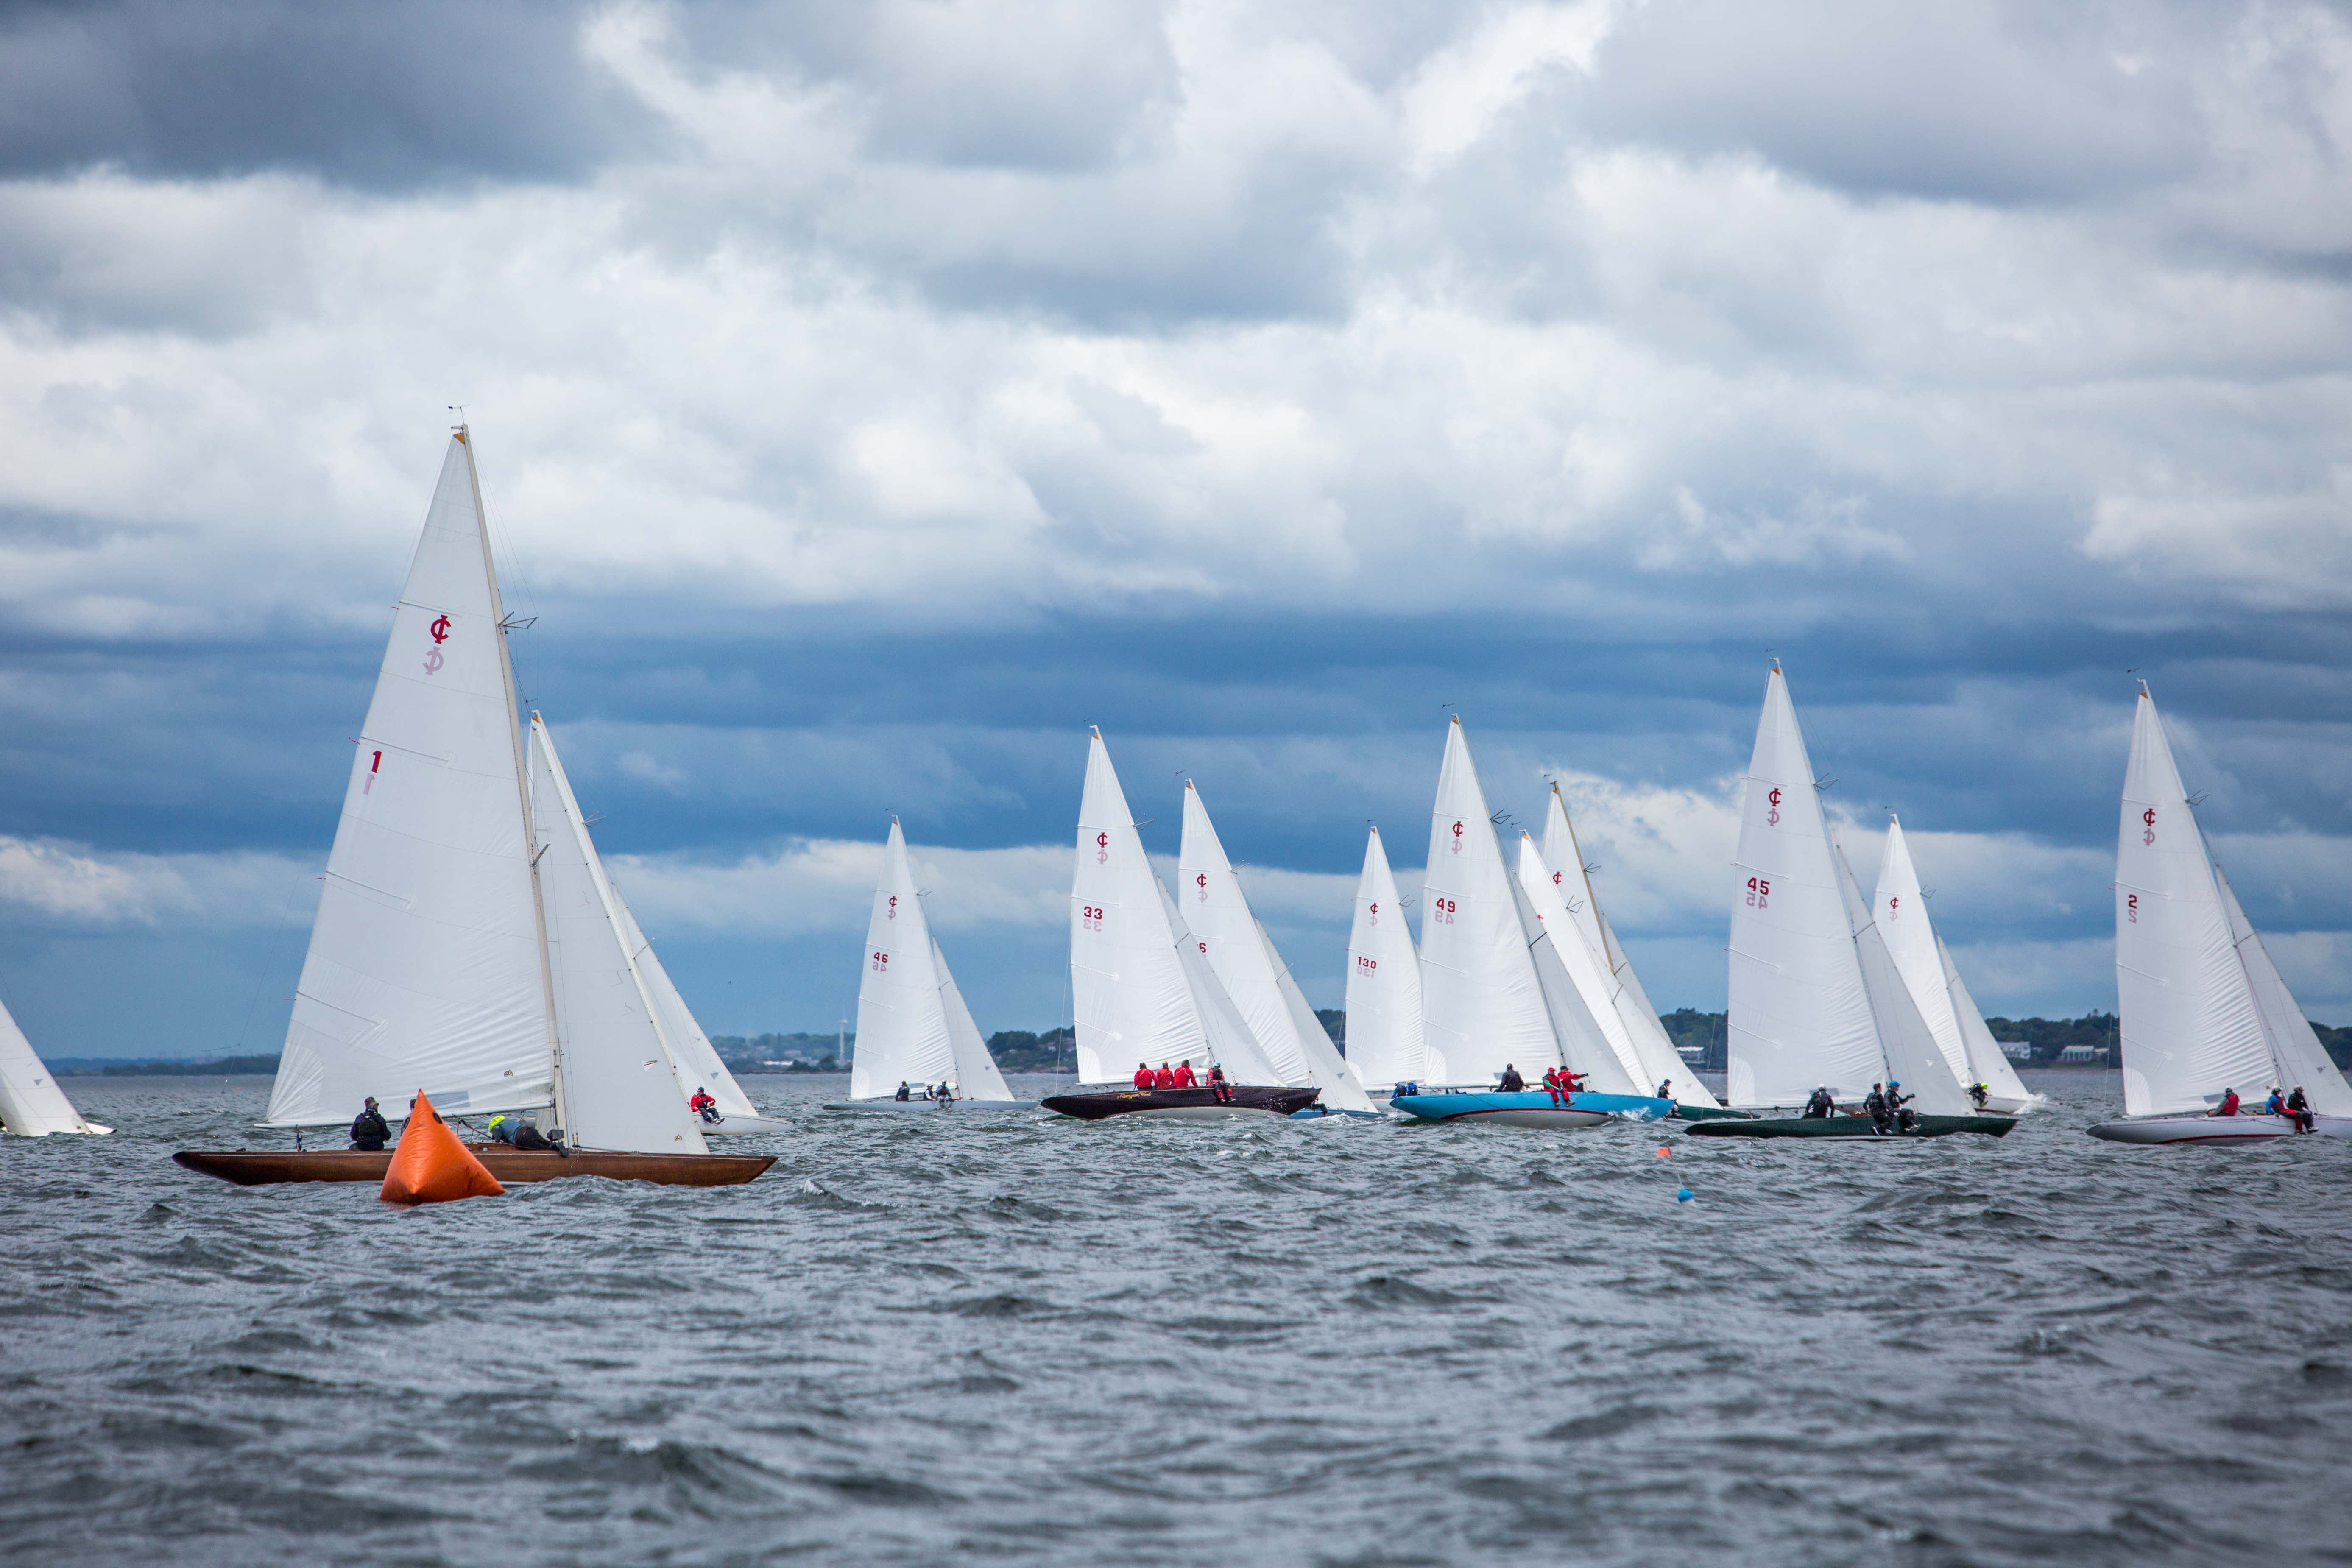 The sixth and final championship race gets underway under dramatic skies off Marblehead, Mass. All photos by Nicholas Schoeder.